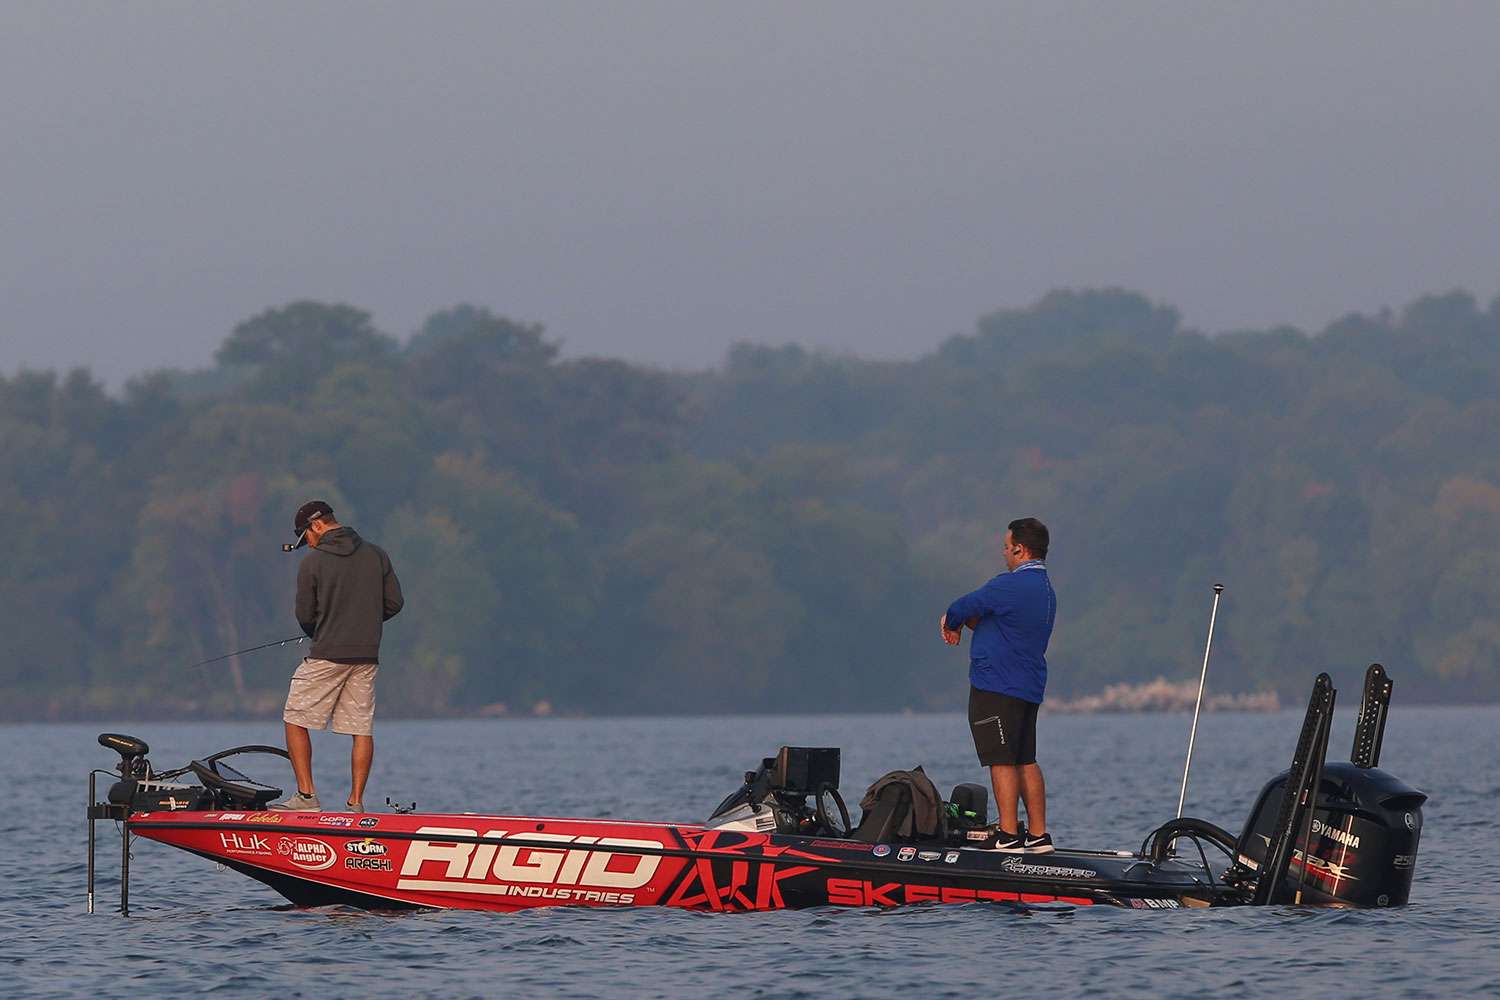 Join current Toyota Bassmaster Angler of the Year points leader Brandon Palaniuk as he strengthens his grip on the most respected title in bass fishing during the first day of the AOY Championship.